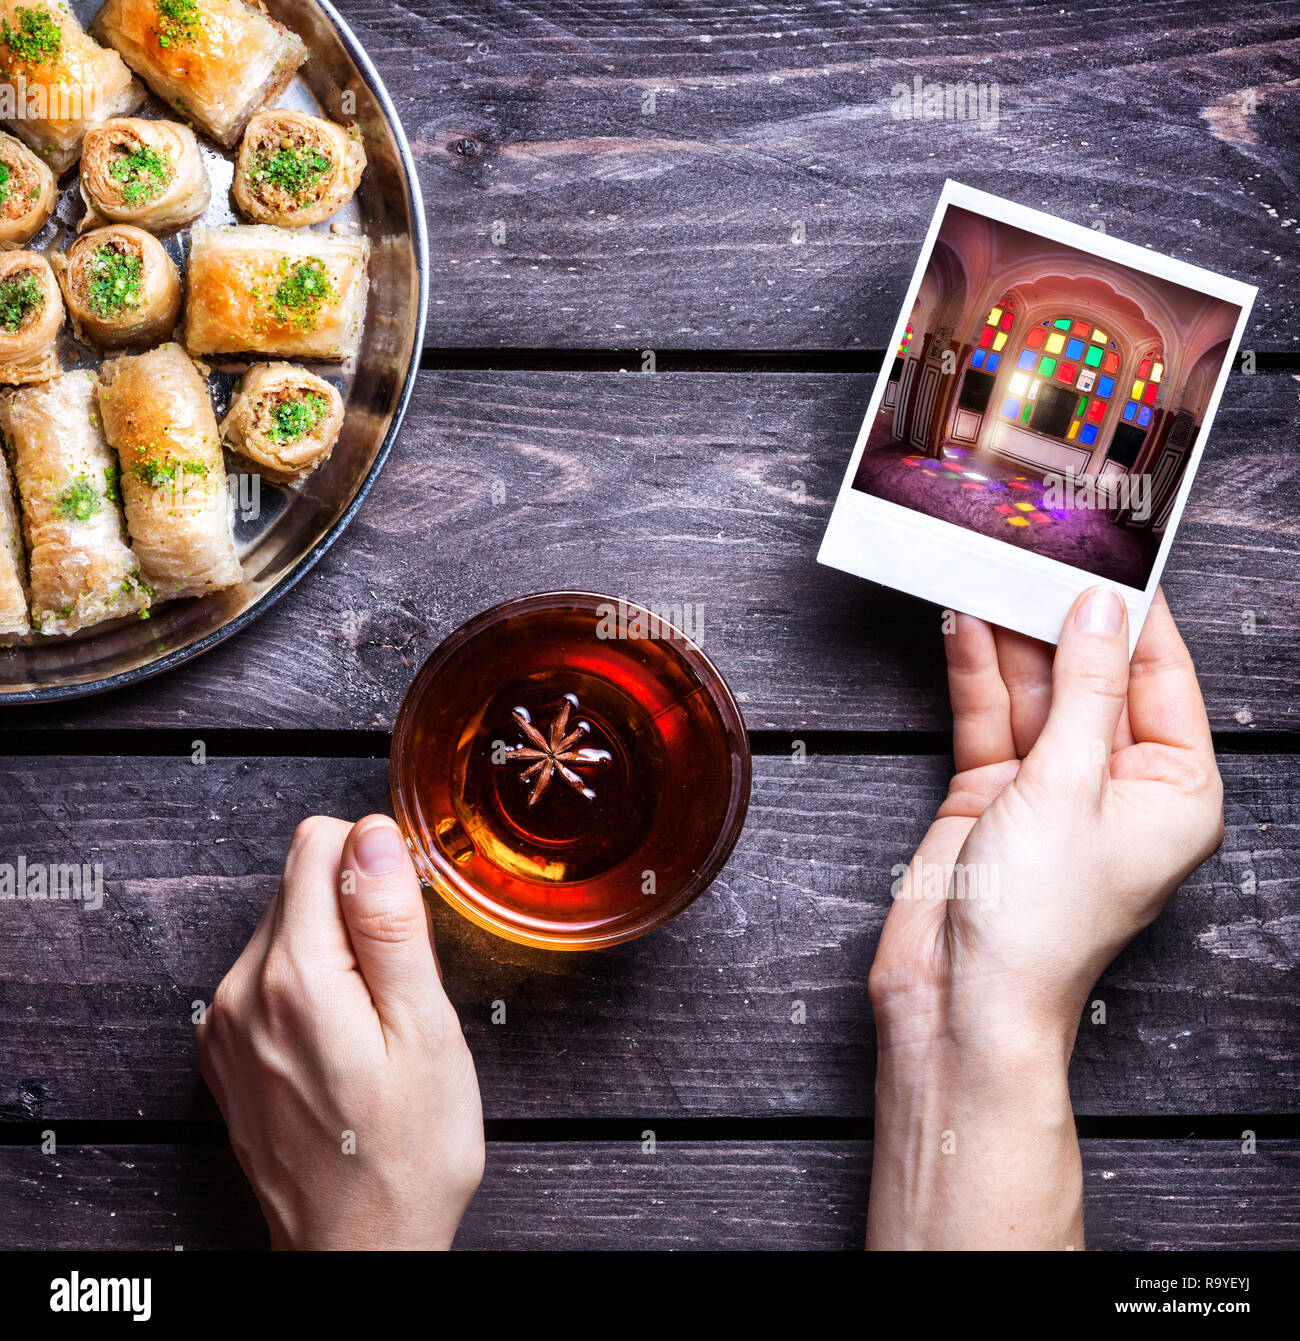 Hands with photo of Rajasthan palace and badyan tea near Turkish baklava on wooden background Stock Photo